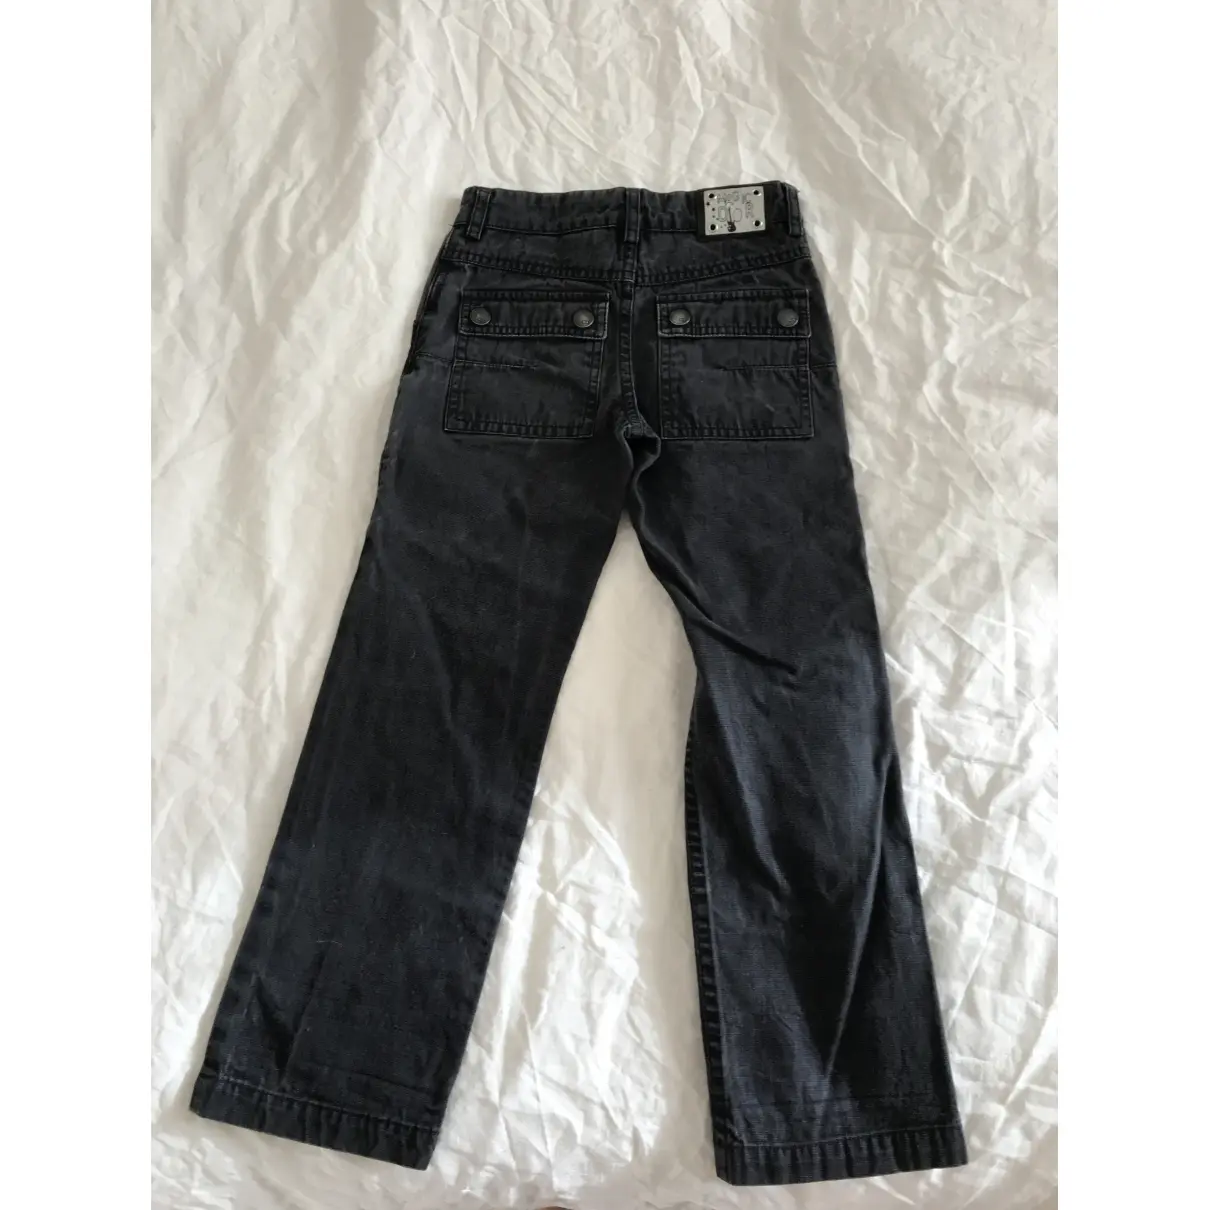 Buy Baby Dior Black Cotton Trousers online